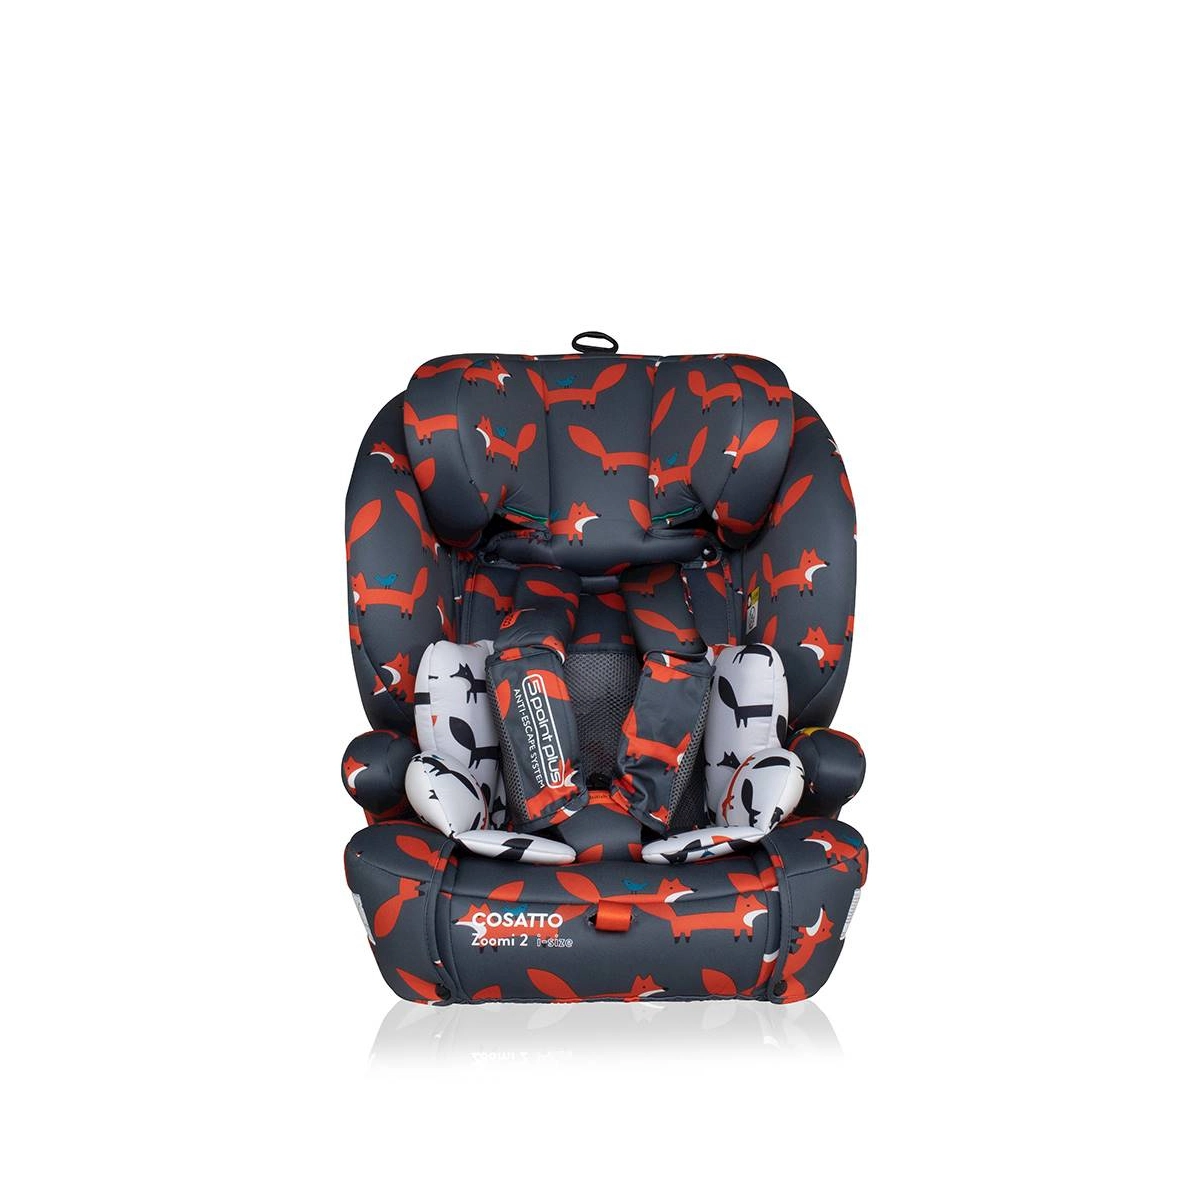 Cosatto Zoomi 2 i-Size Group 1/2/3 Car Seat